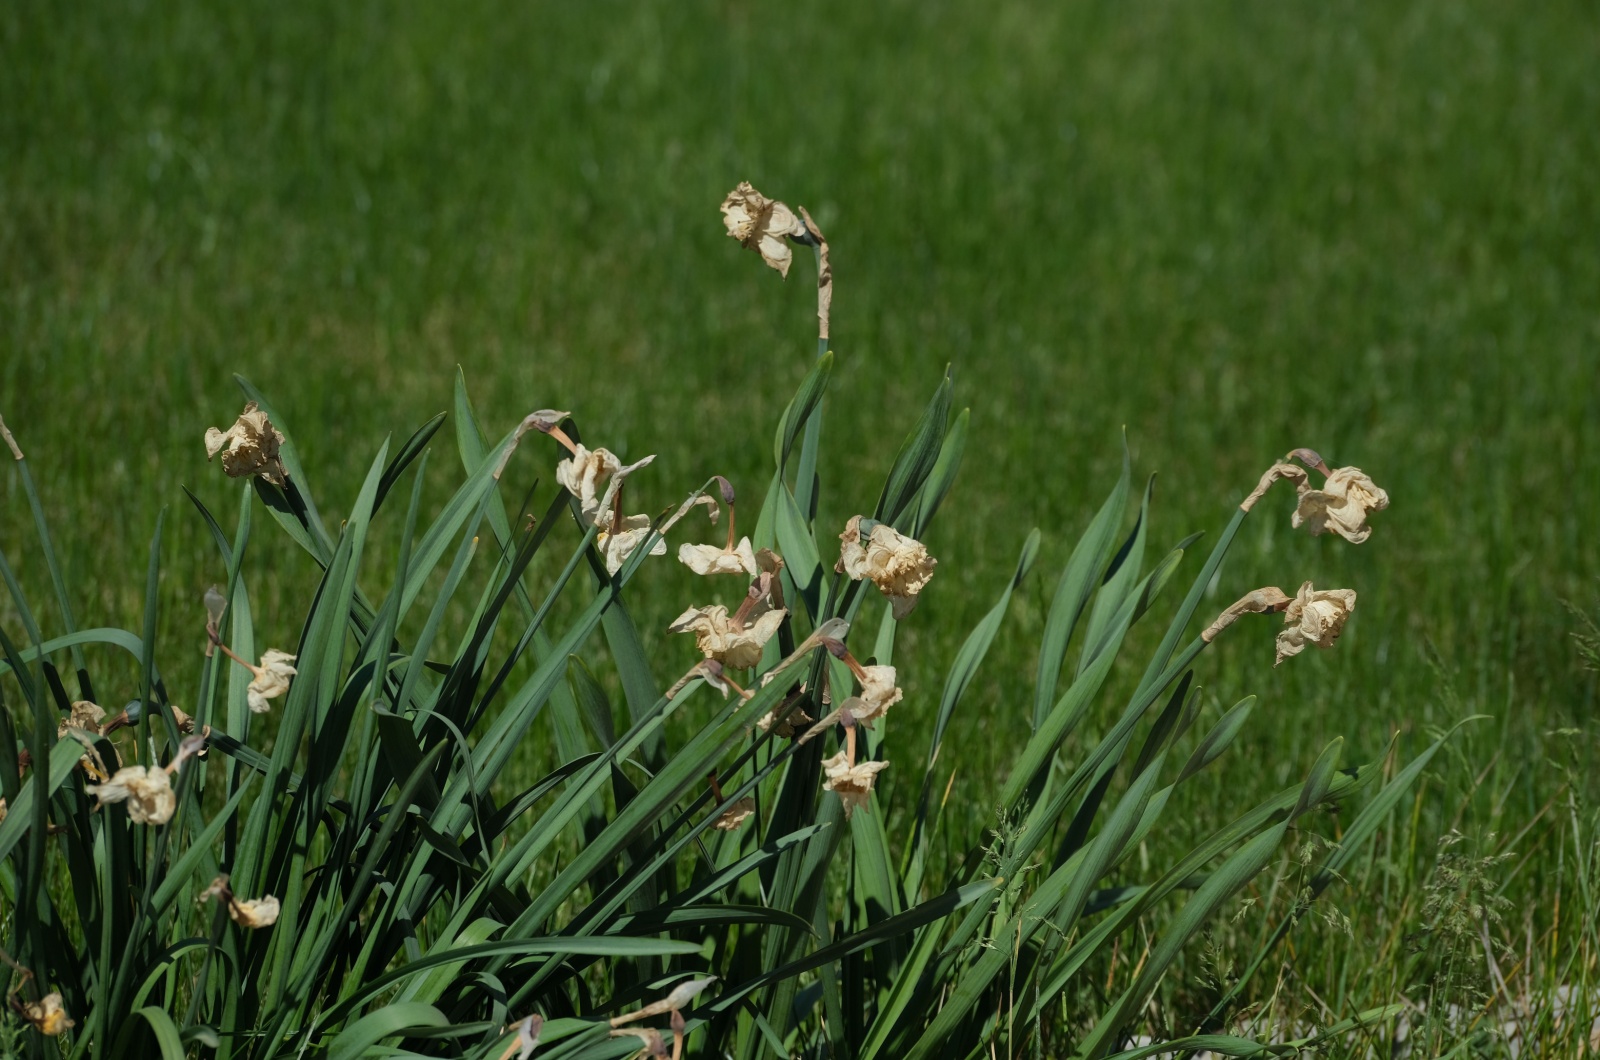 Group of wilted daffodils with green grass